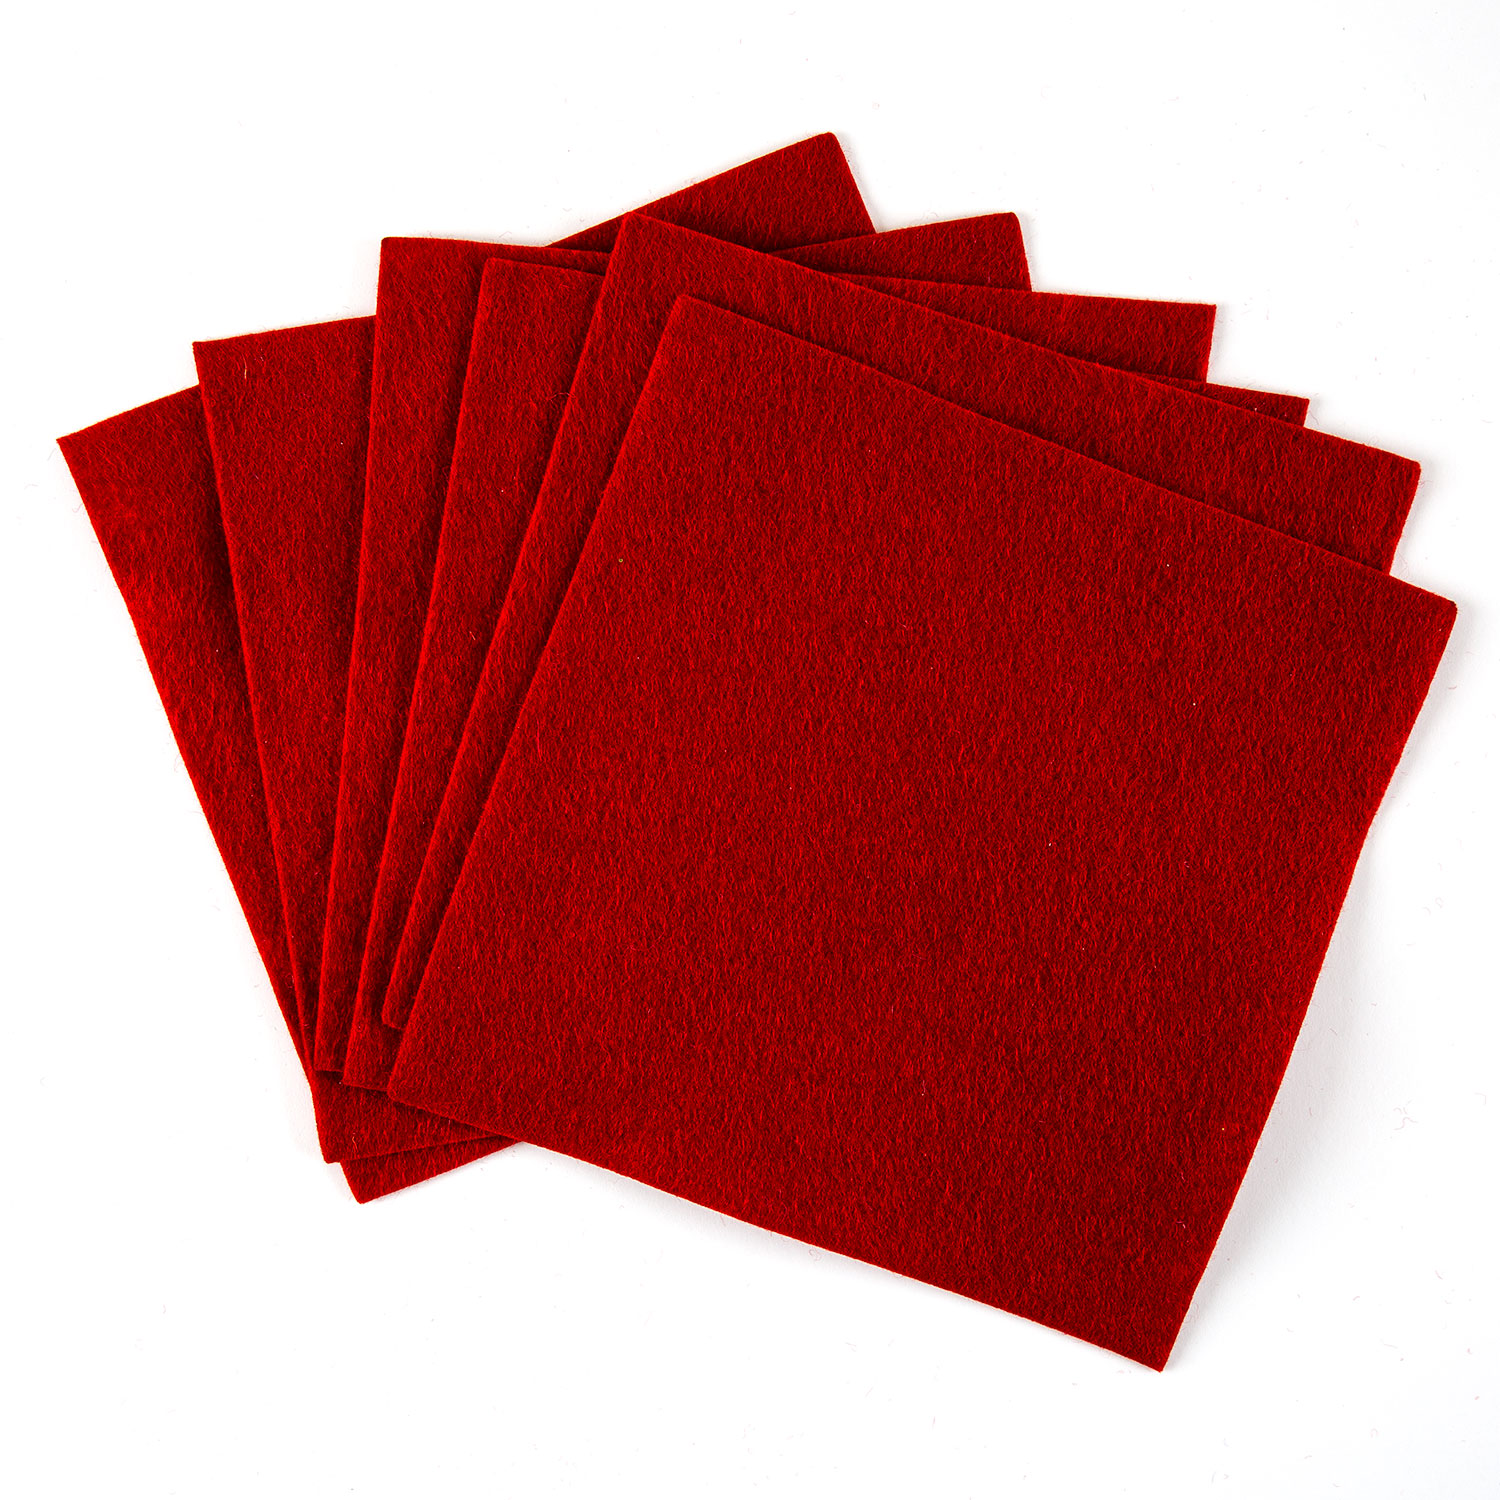 Felt by Clarity Pack of 6 Tile Backers 6x6" Non Adhesive Felt Pick N Mix - Pick any 2 - Garnet